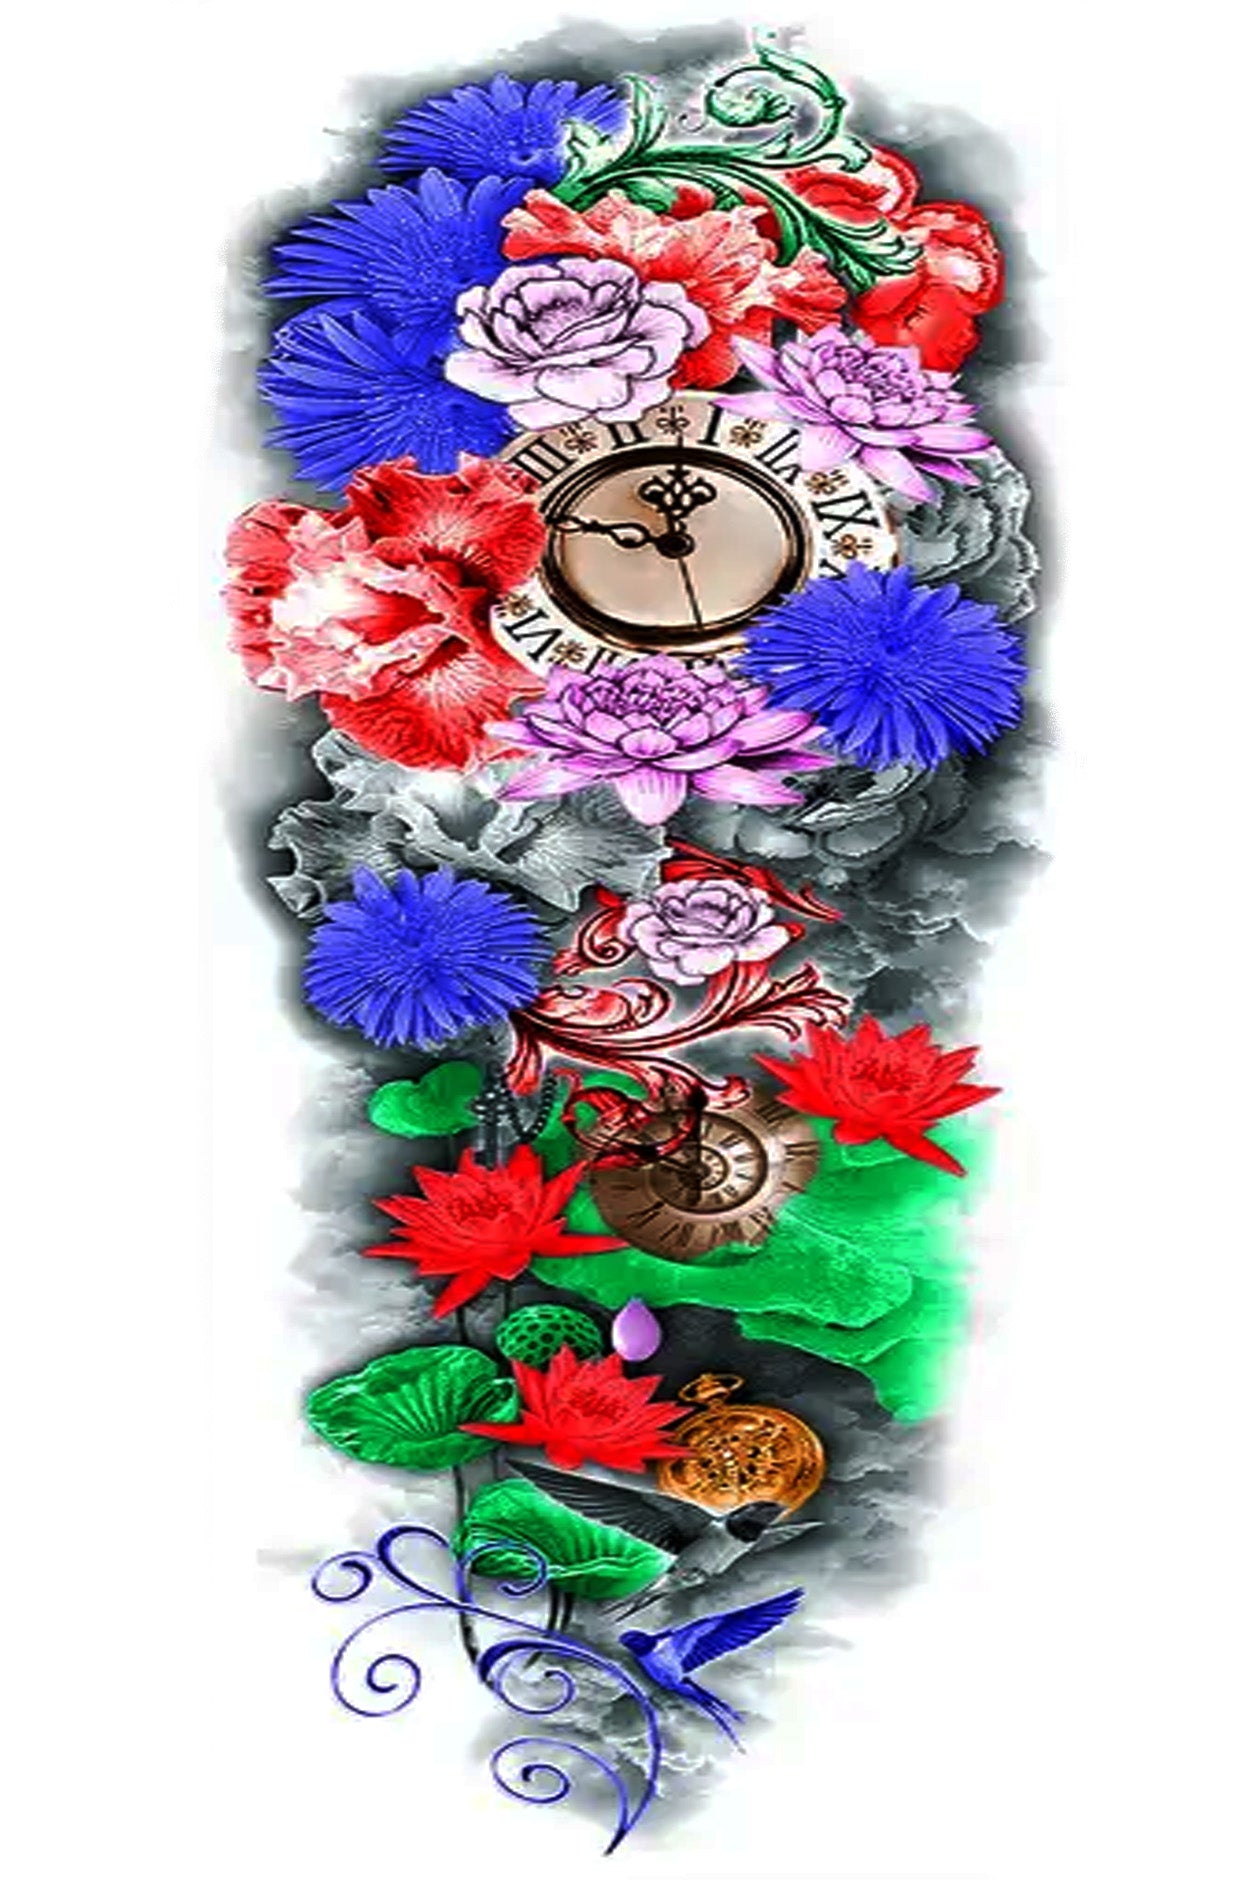 An arm’s worth of flowers mixed with time clocks, purple asters, deep pink irises, pink carnations, and red lotus. They are intertwined with a variety of swirls, scrolls, filigree, green leaves, and blue swallow birds.  Creatively wear this artwork on any part of your body, arm, leg, torso, or shoulder.